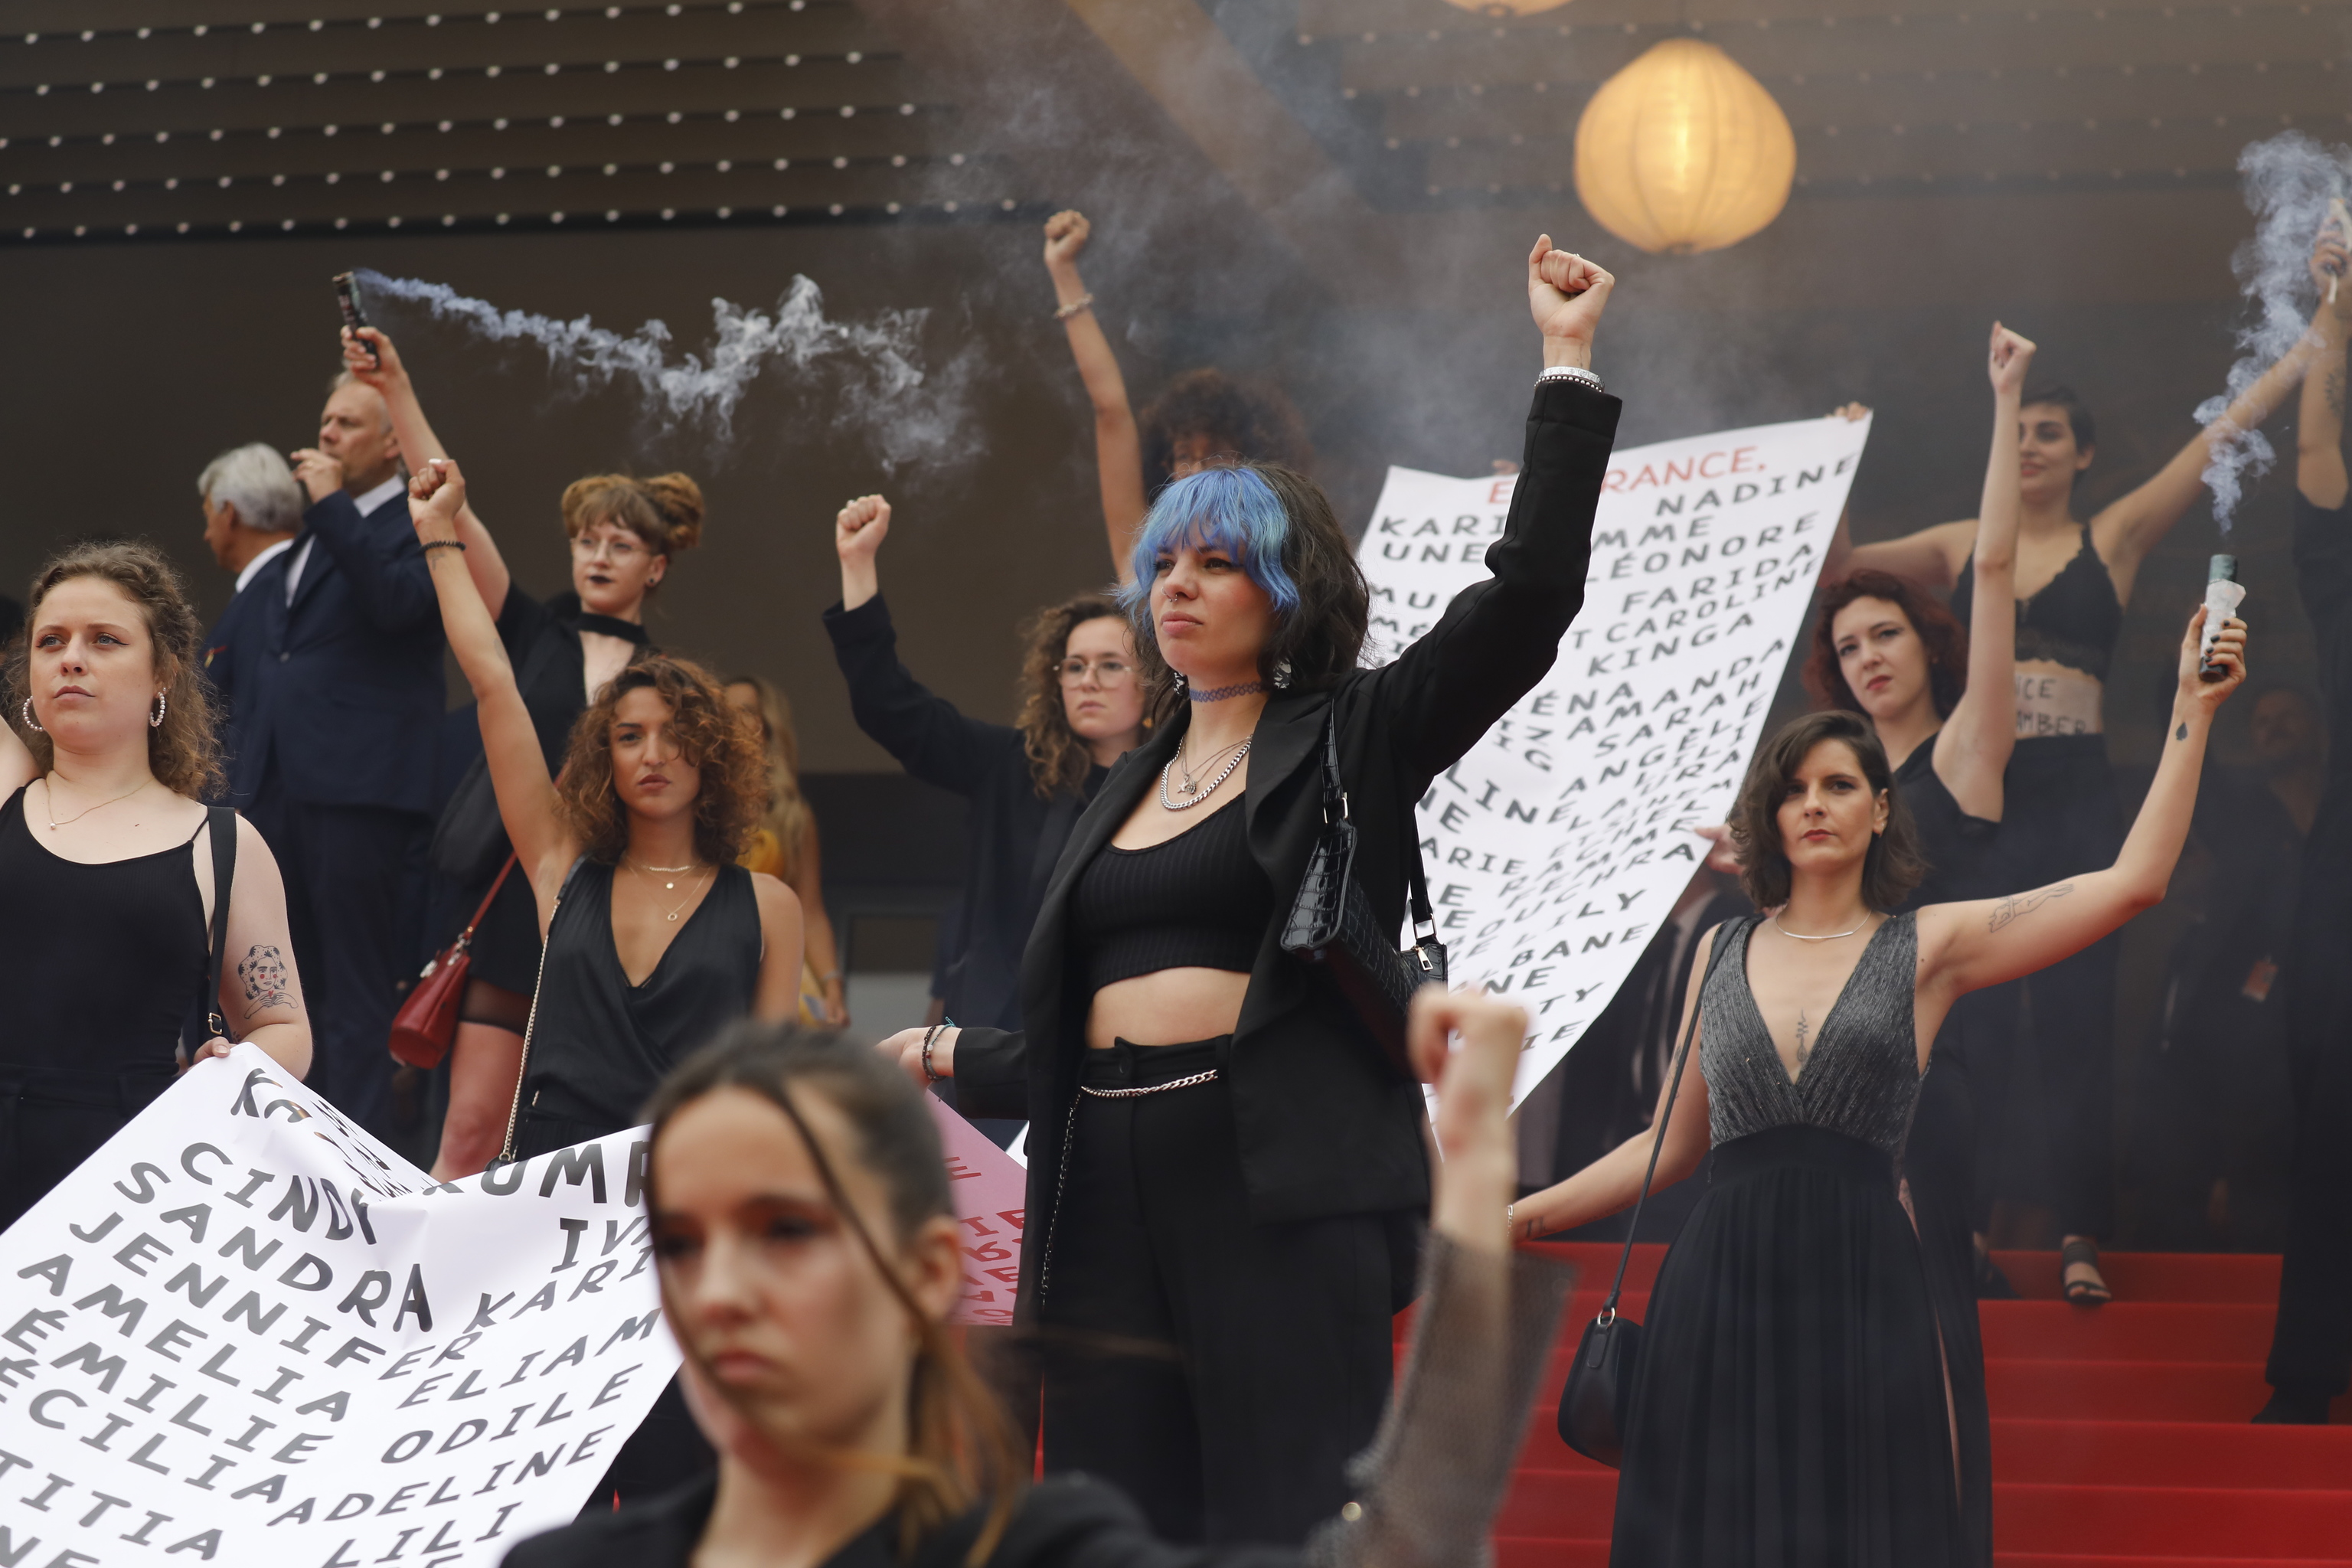 Activists of the feminist movement 'Les Coleus' carry a banner with the names of 129 women killed by sexist violence in France at a presentation of 'Holy Spider' in Cannes.